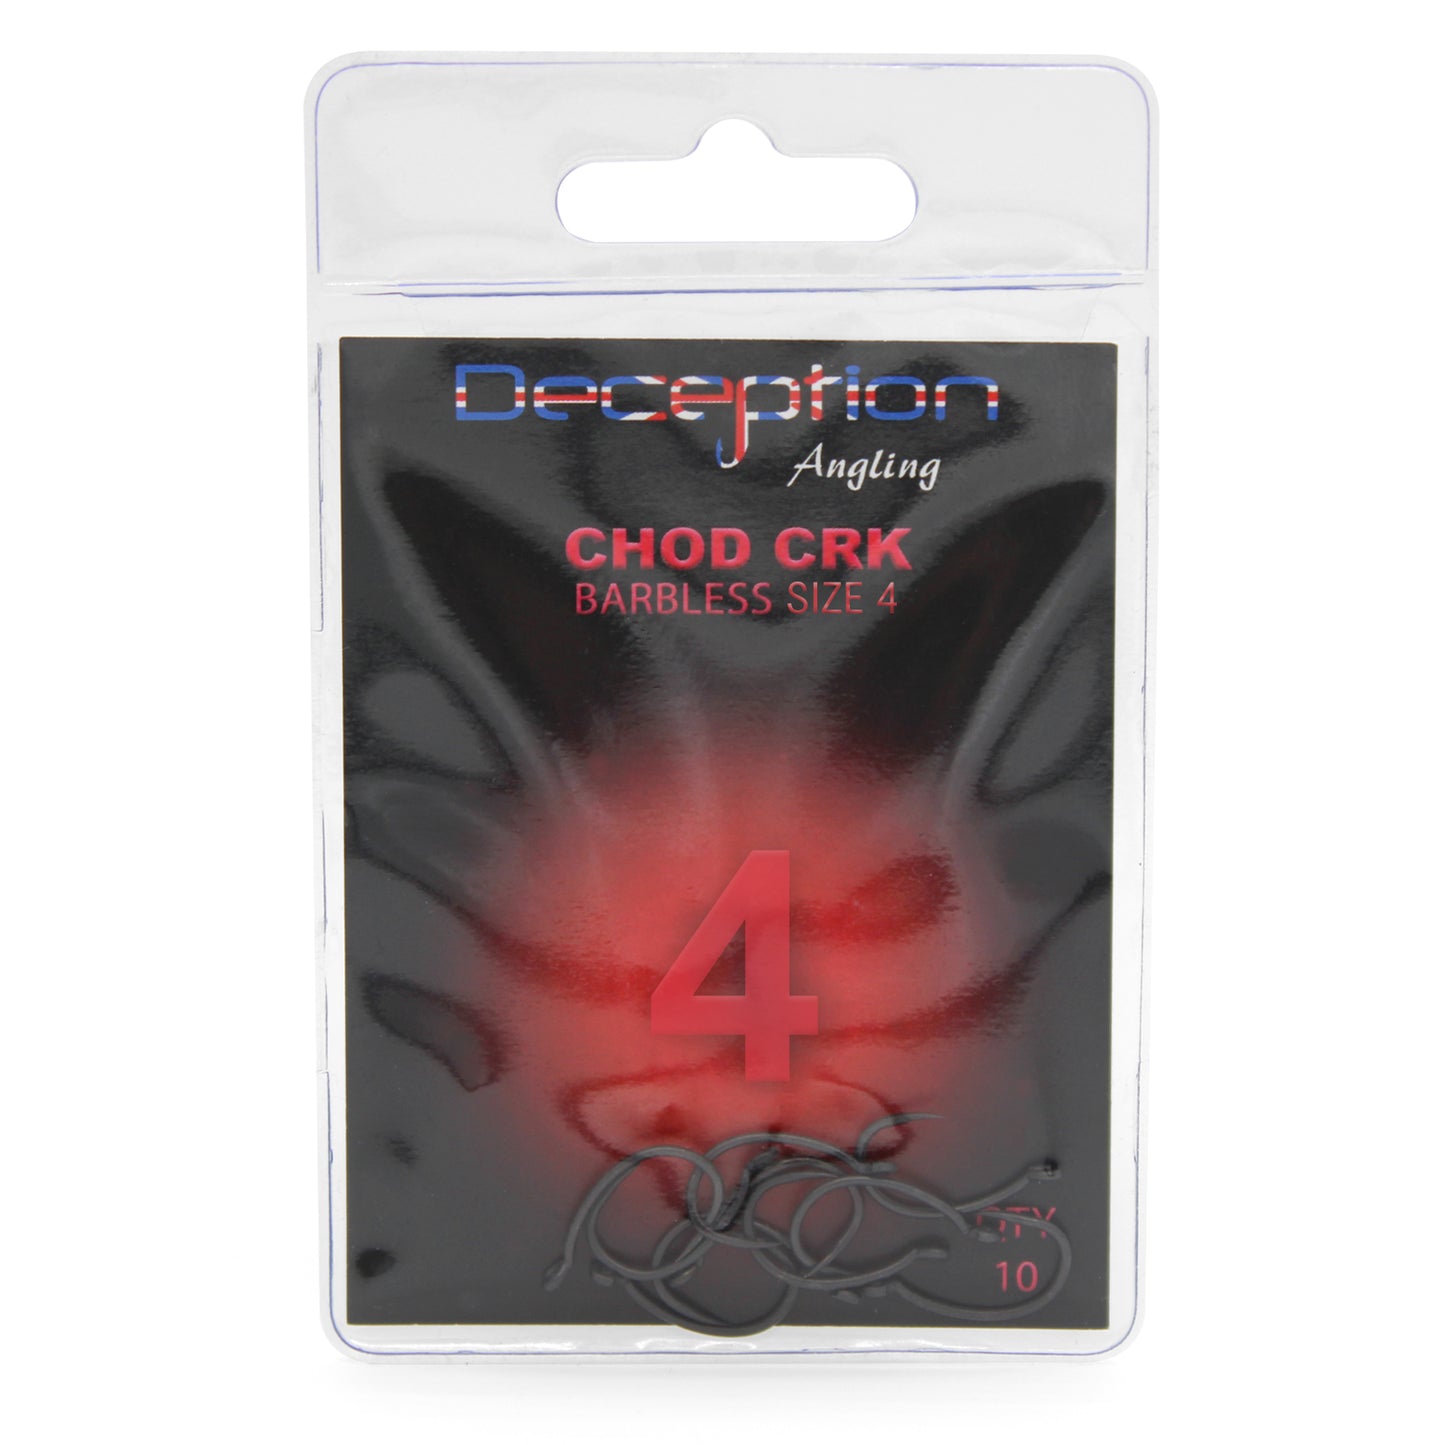 Deception Angling Chod CRK Barbless Hooks for Fishing Size 4